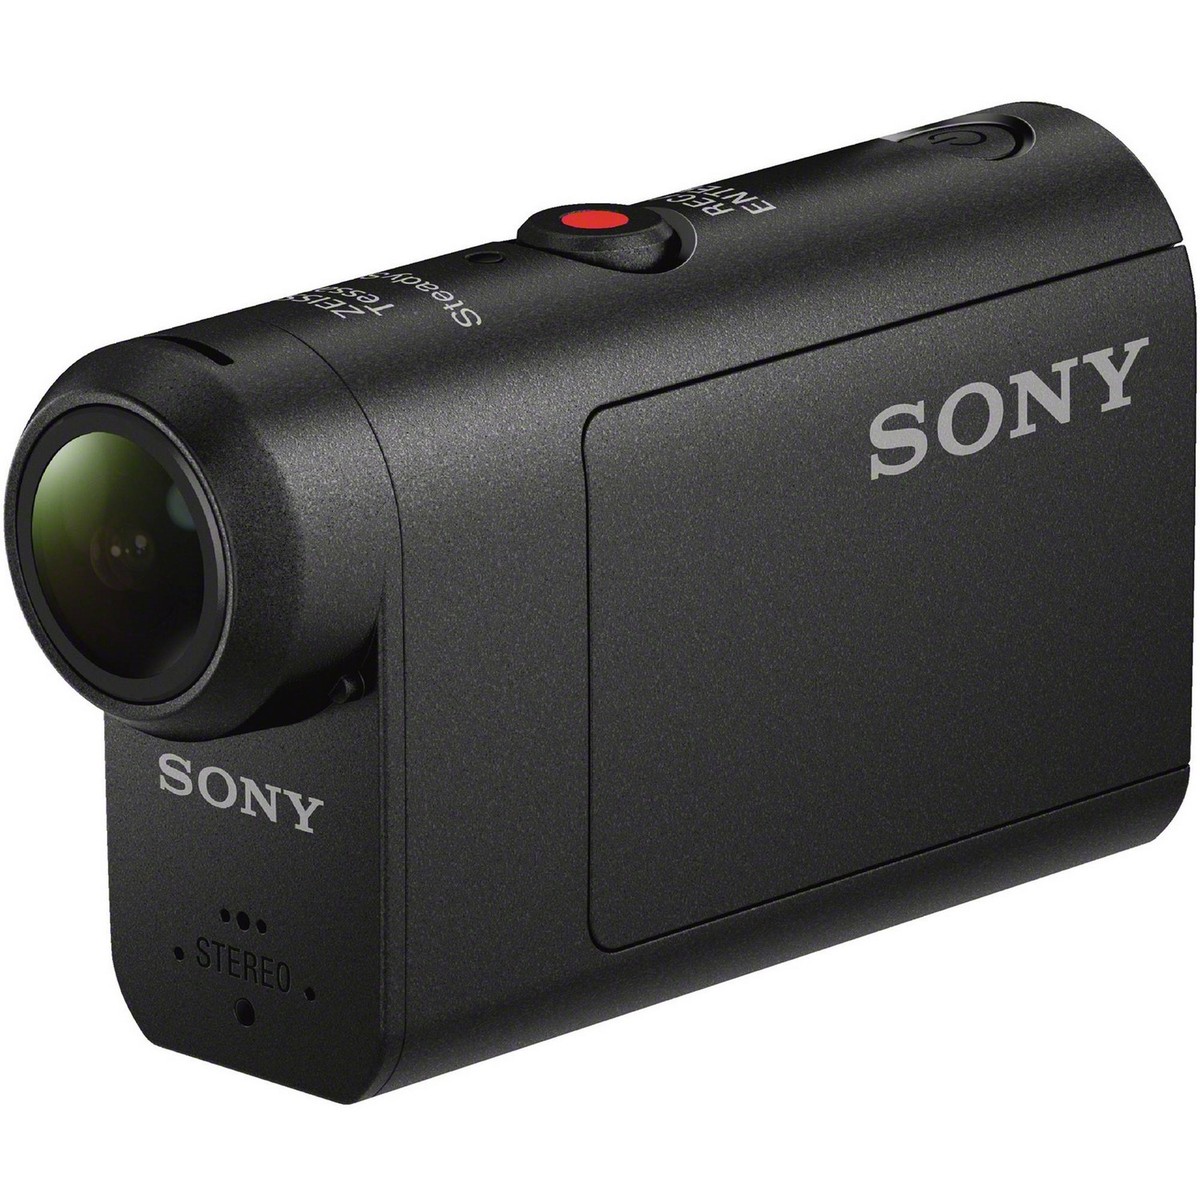 Sony Action Camera HDR-AS50 11.1MP